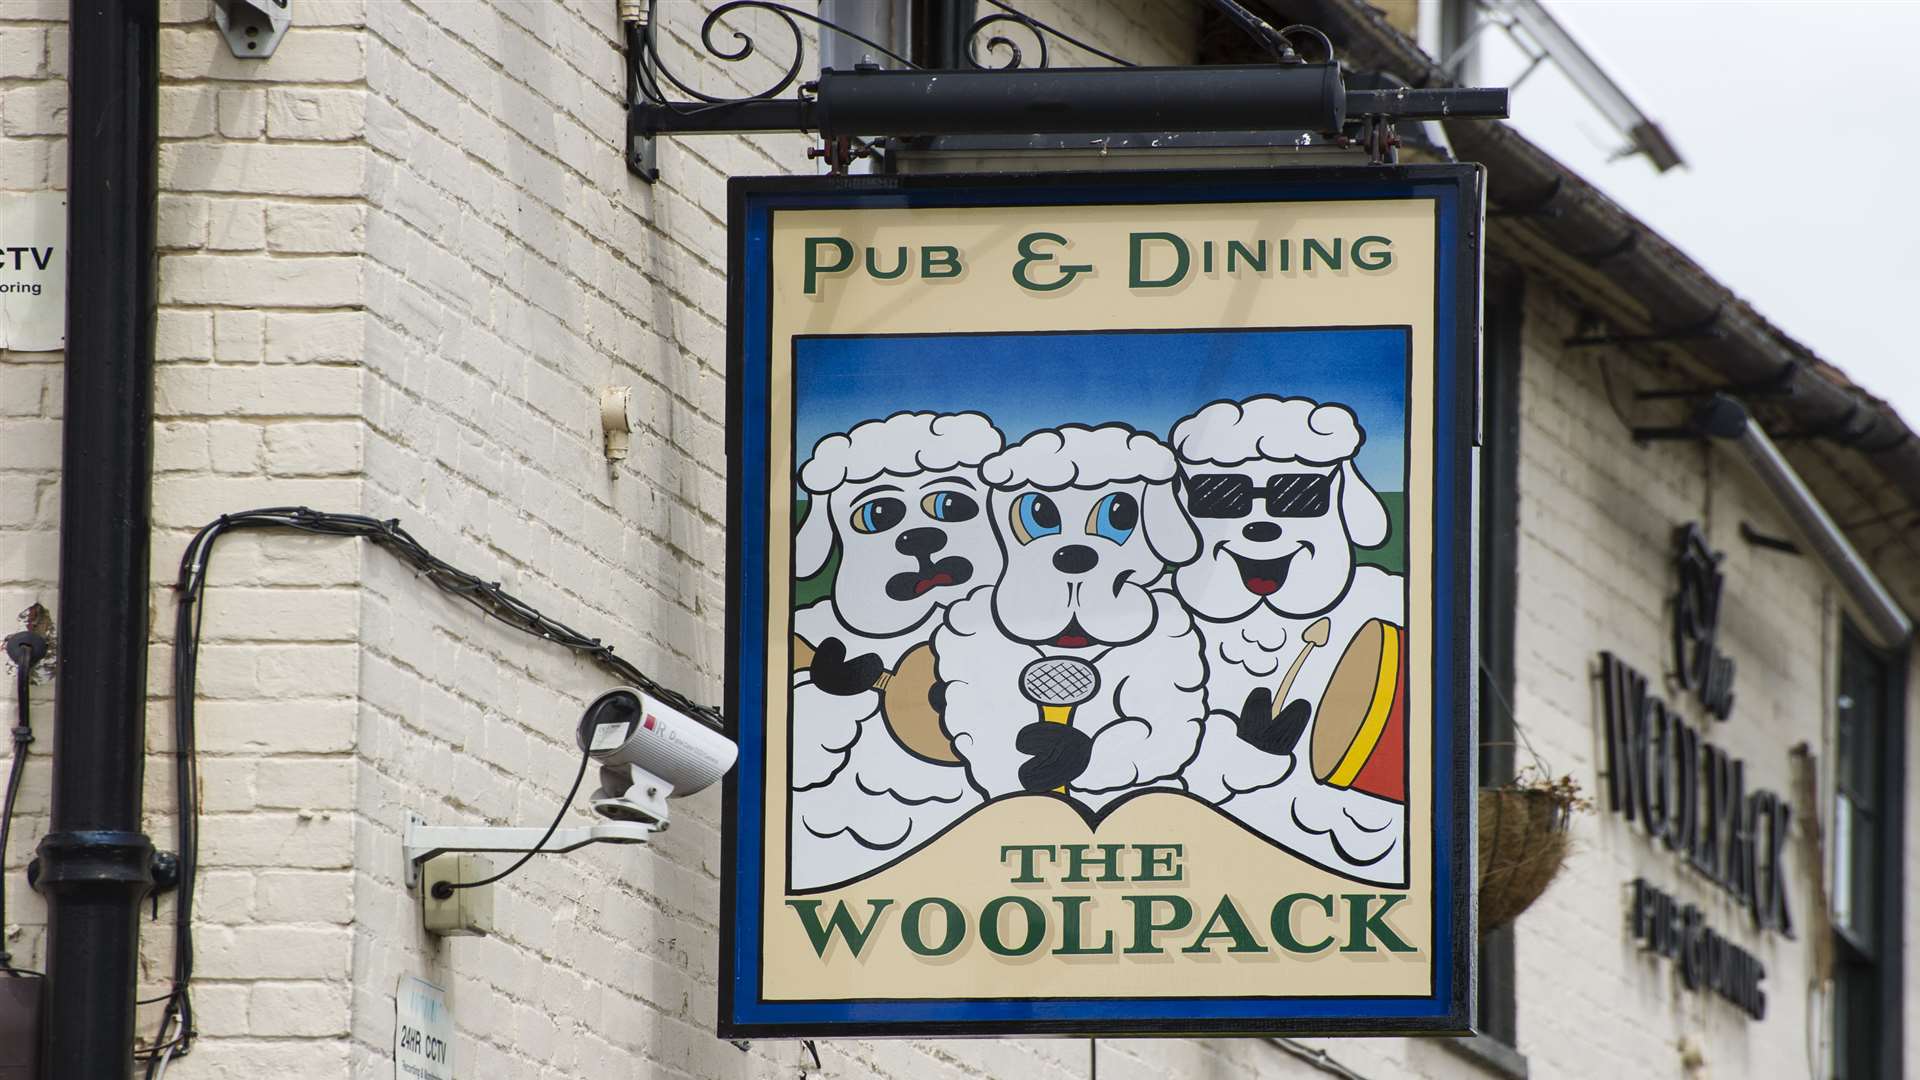 The Woolpack pub and its sign